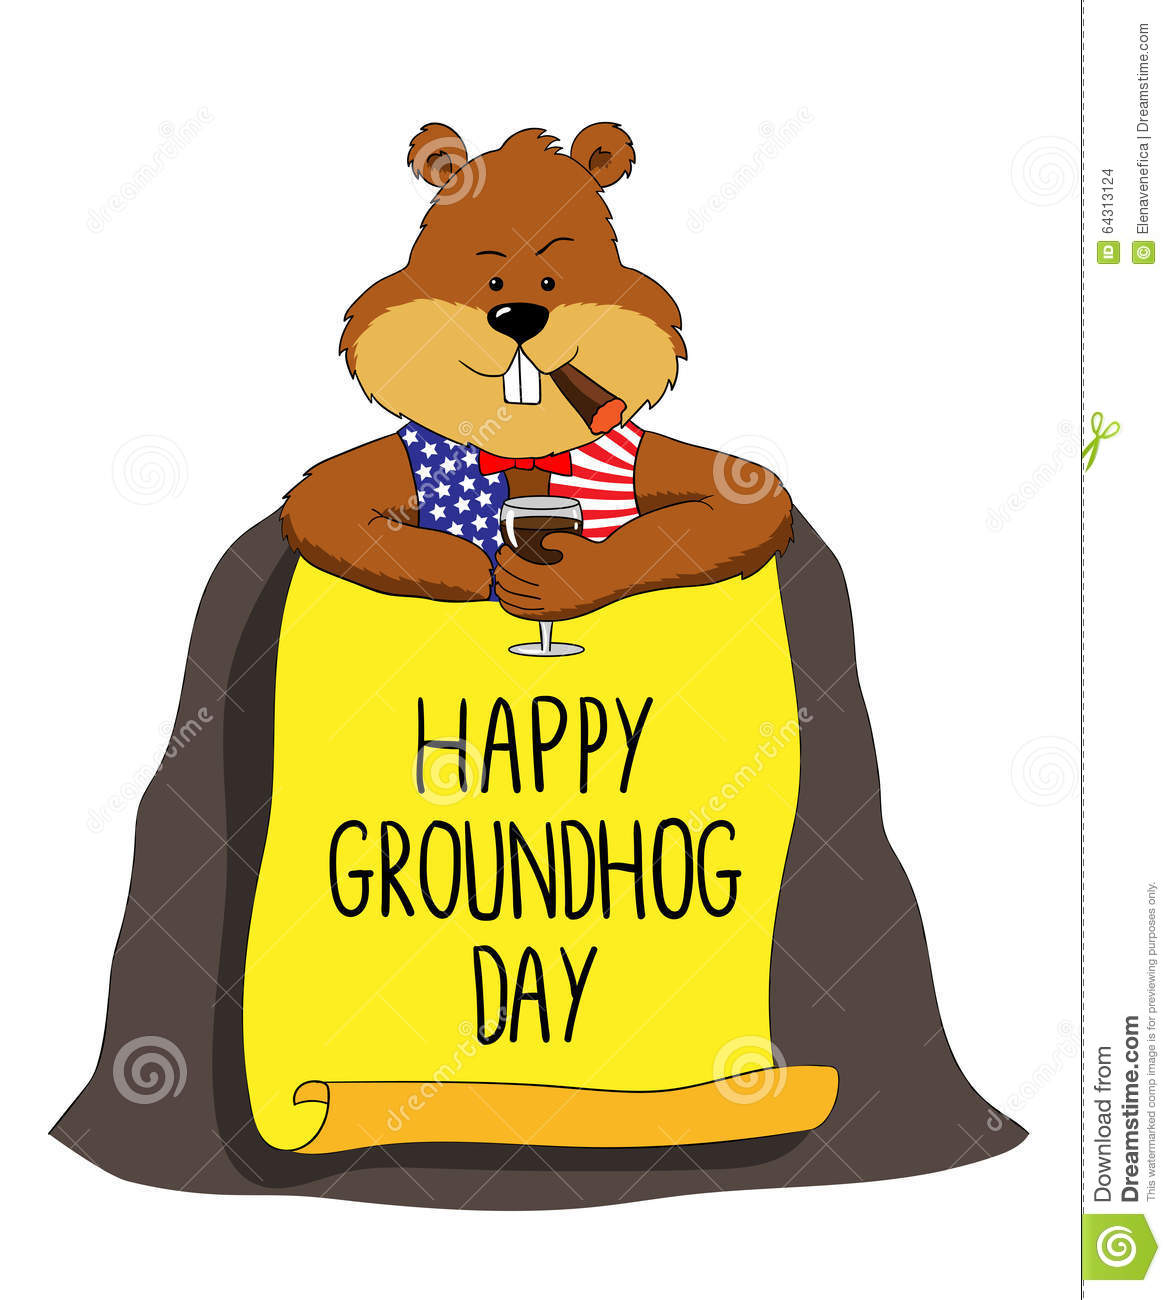 Free happy groundhog day clipart 3 » Clipart Station.